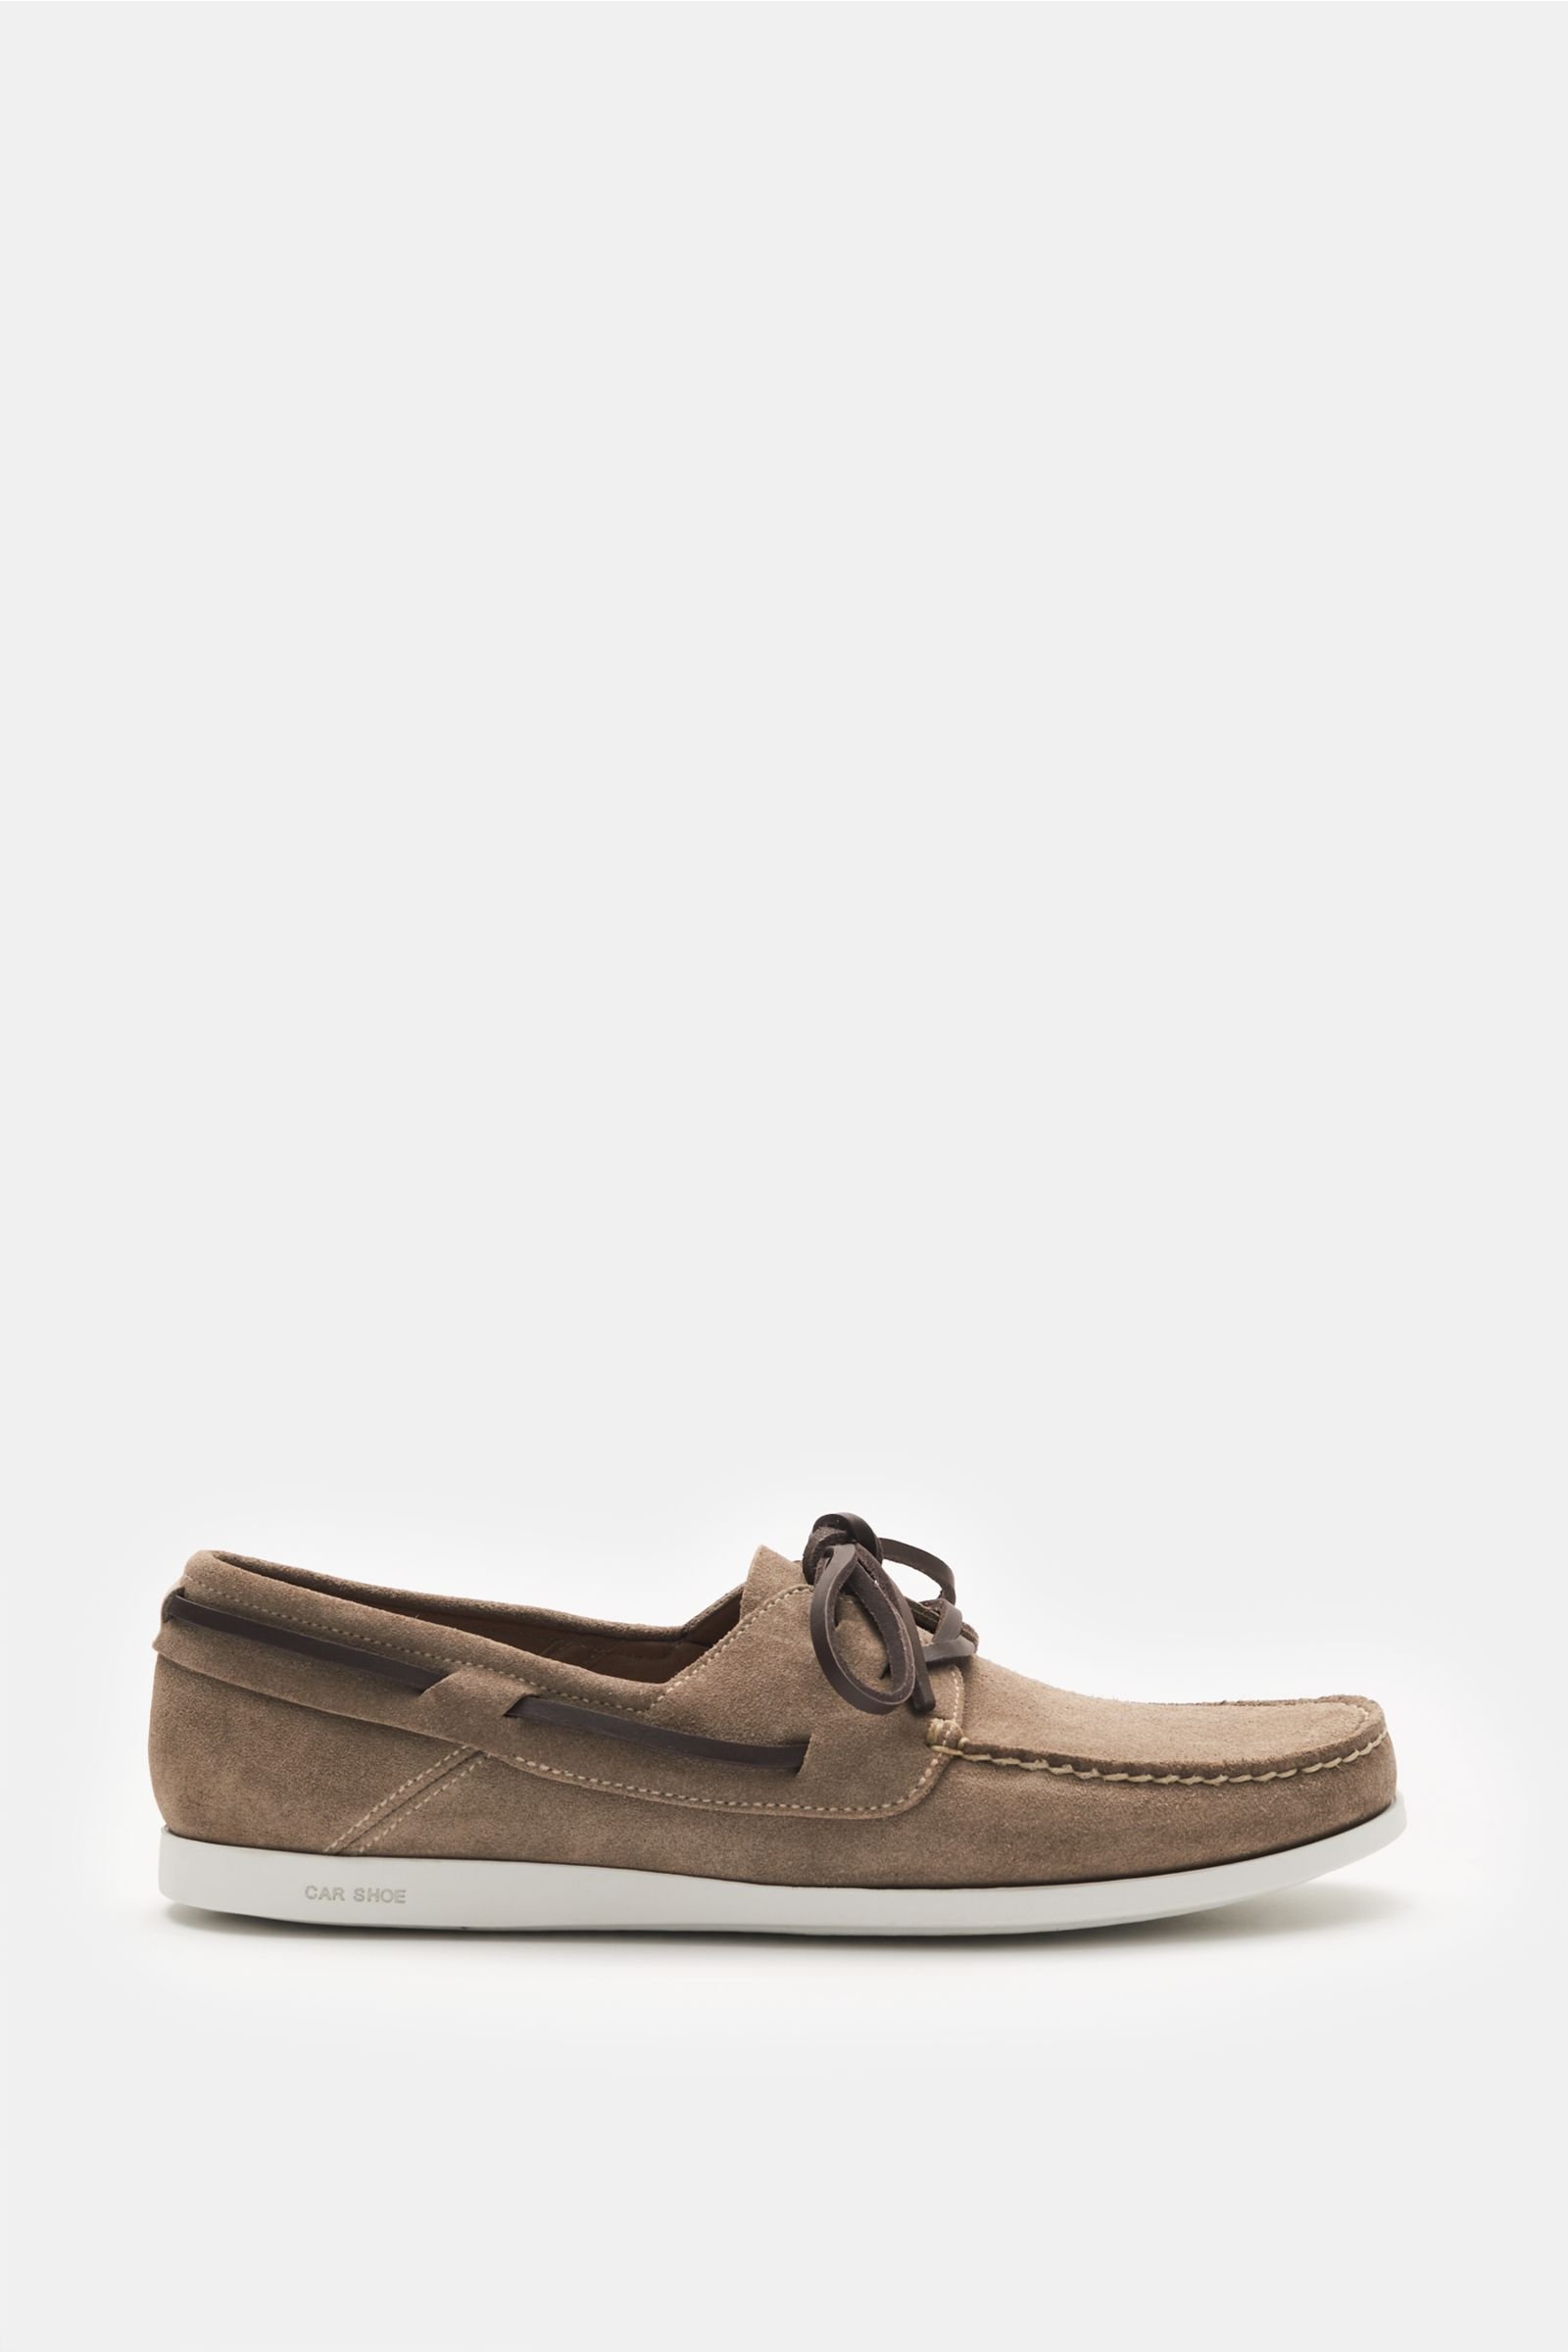 Boat shoes grey-brown